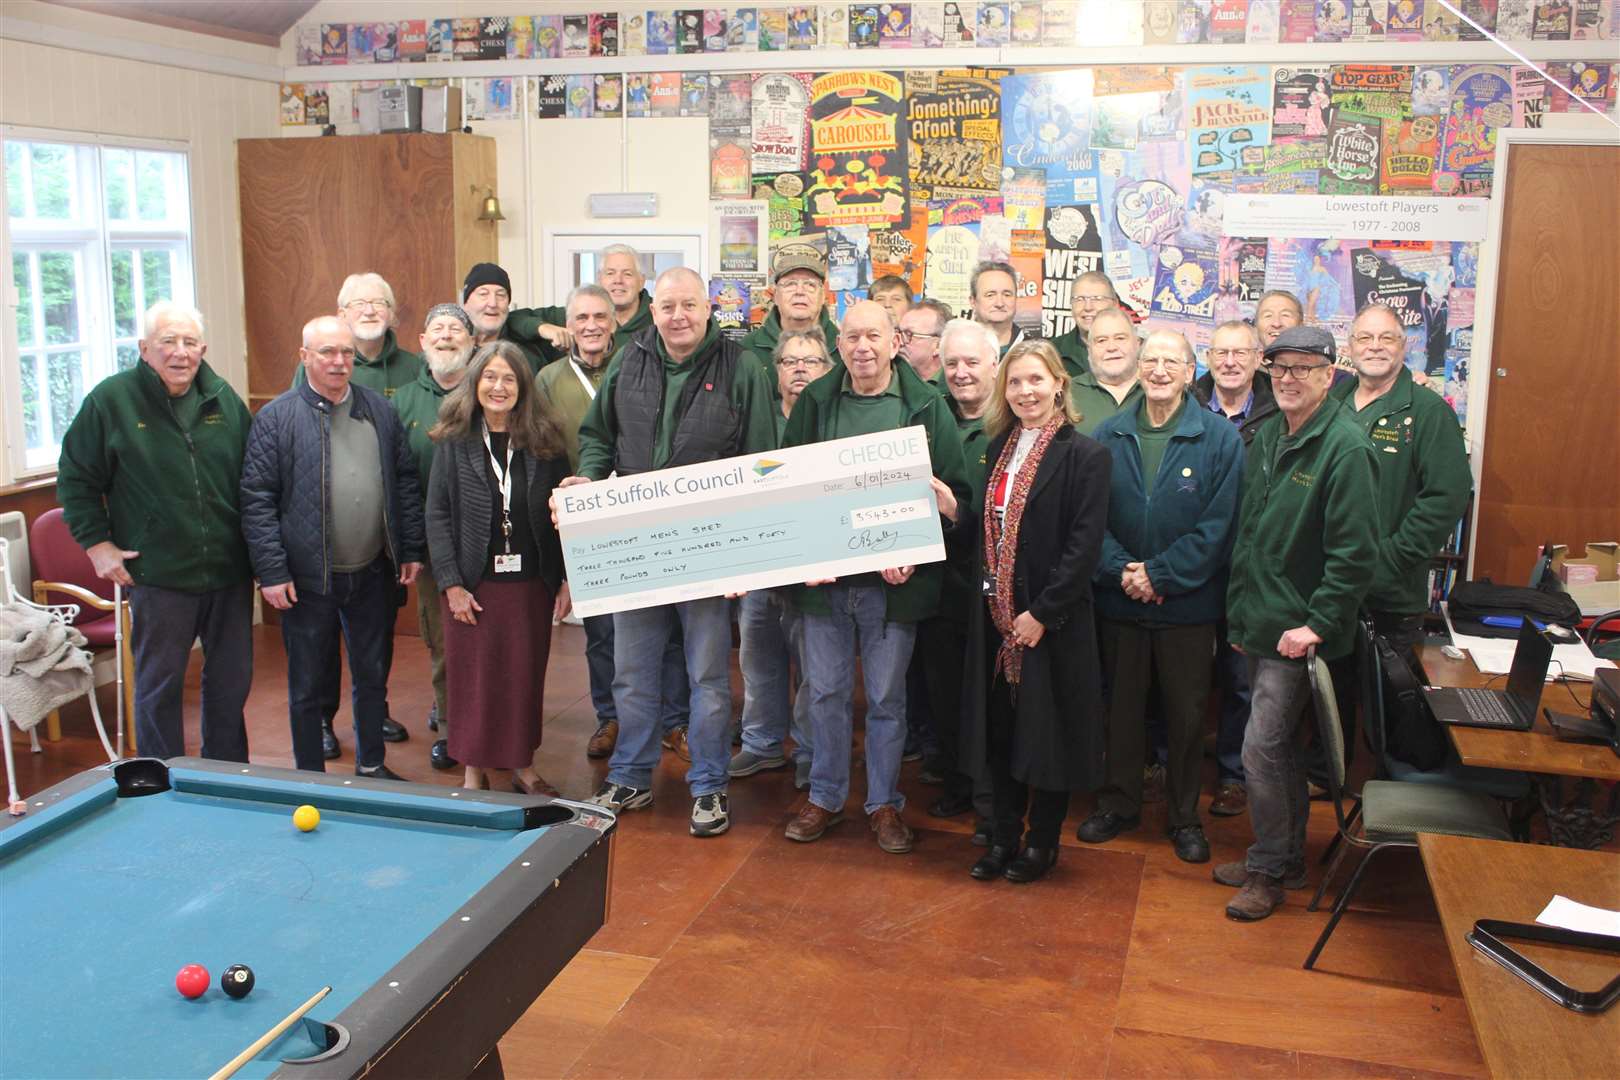 Lowestoft Men's Shed receives funding from six East Suffolk councillors to help with venue revamp. Picture: East Suffolk Council